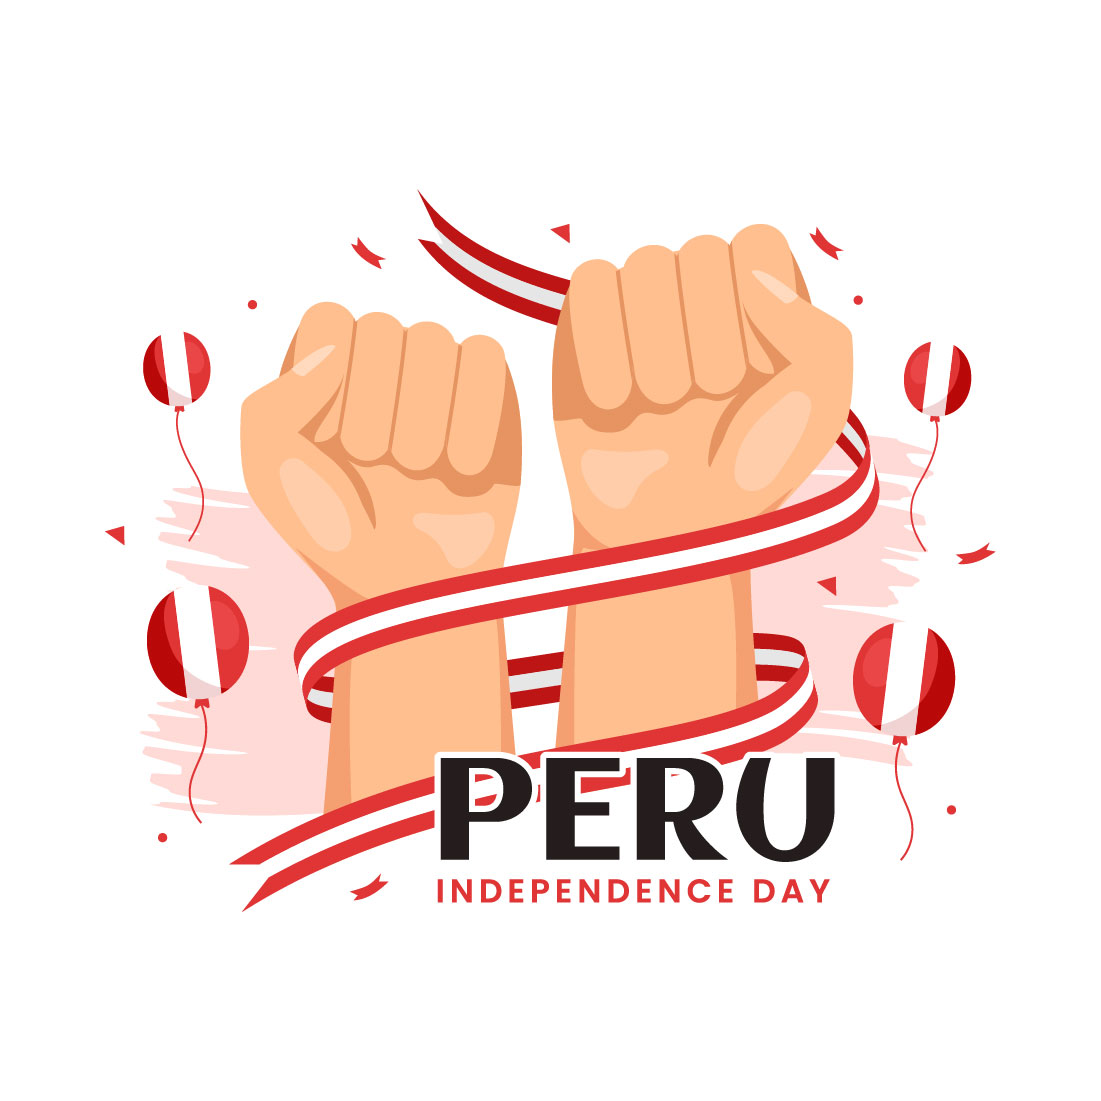 20 Peru Independence Day Illustration preview image.